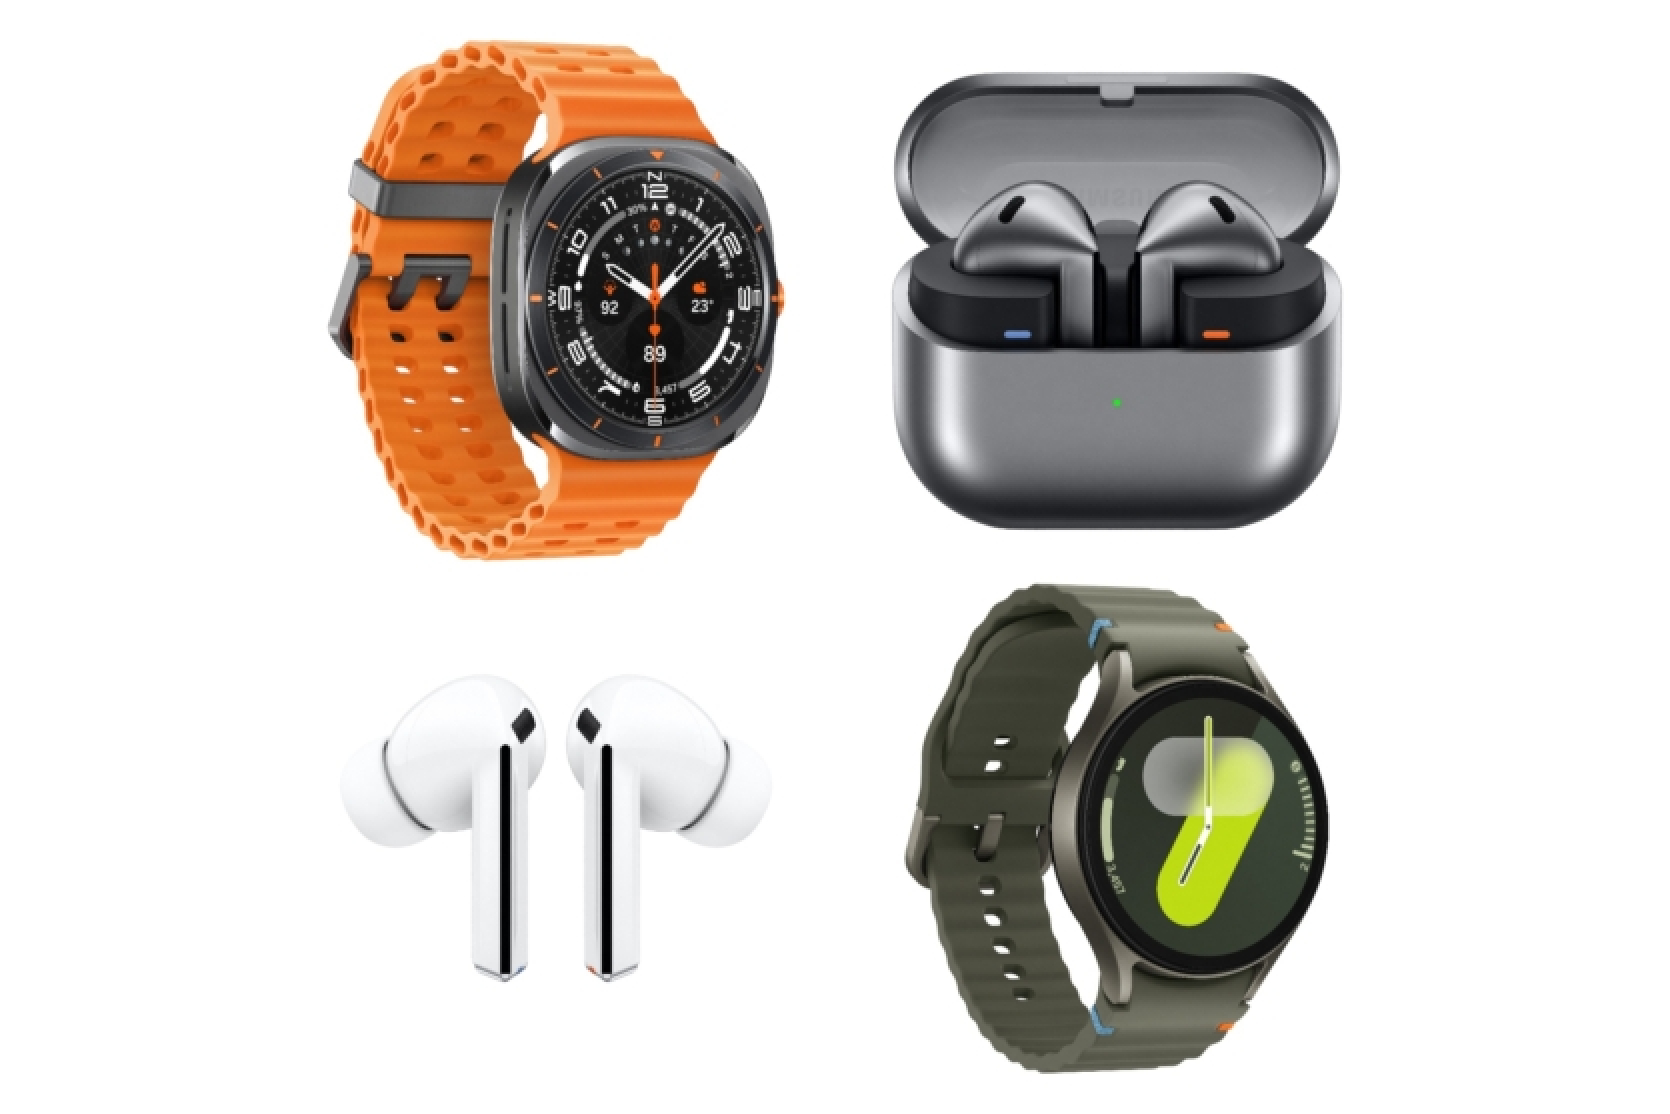 The upcoming Galaxy Watch Ultra, Galaxy Watch 7, Galaxy Buds 3 Pro and Galaxy Buds 3 have been spotted in leaked official renders